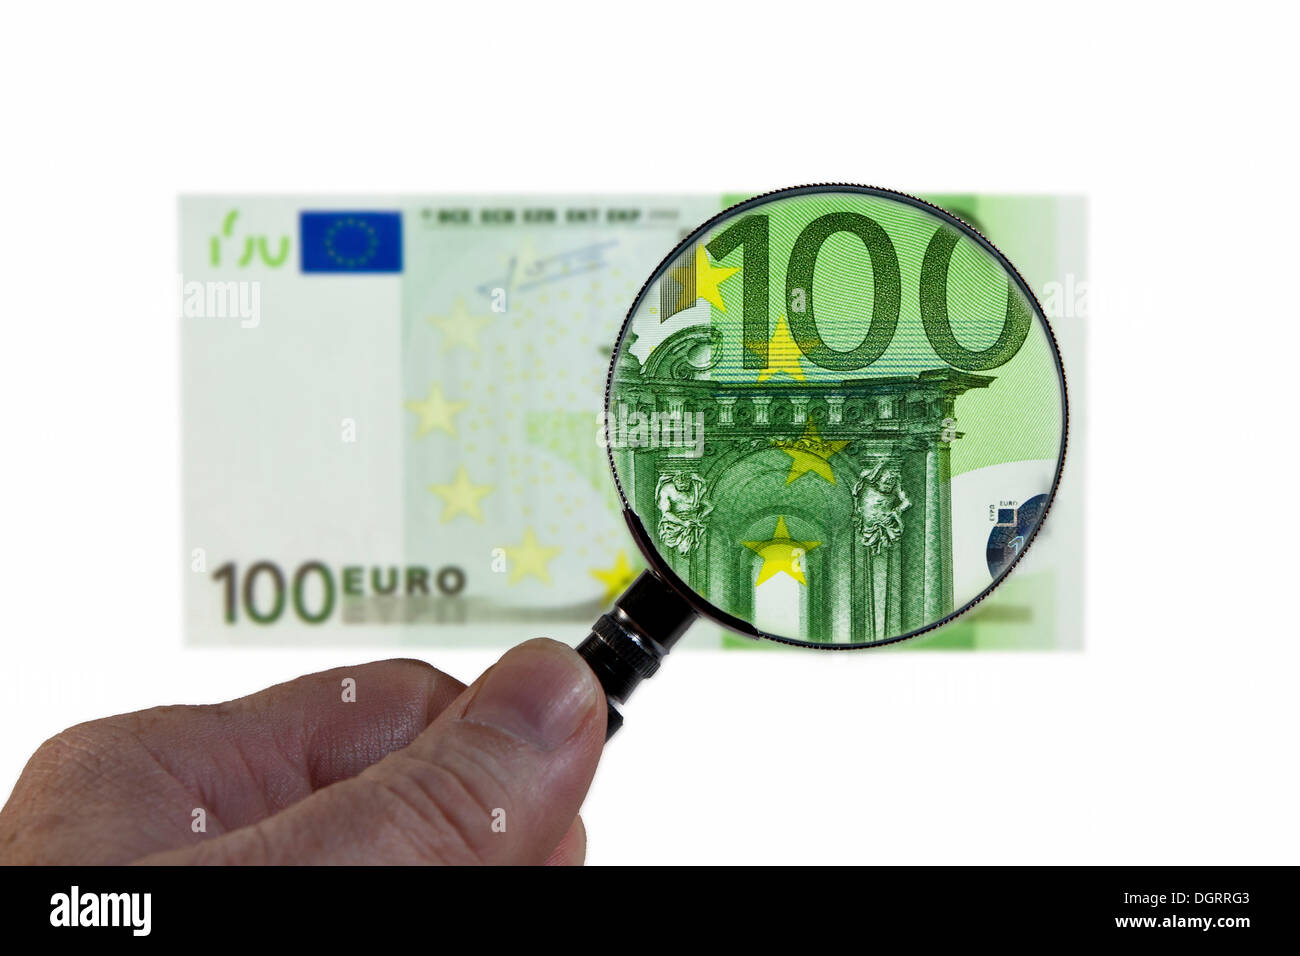 100 euro banknote under a magnifying glass, symbolic image, observation of the euro Stock Photo